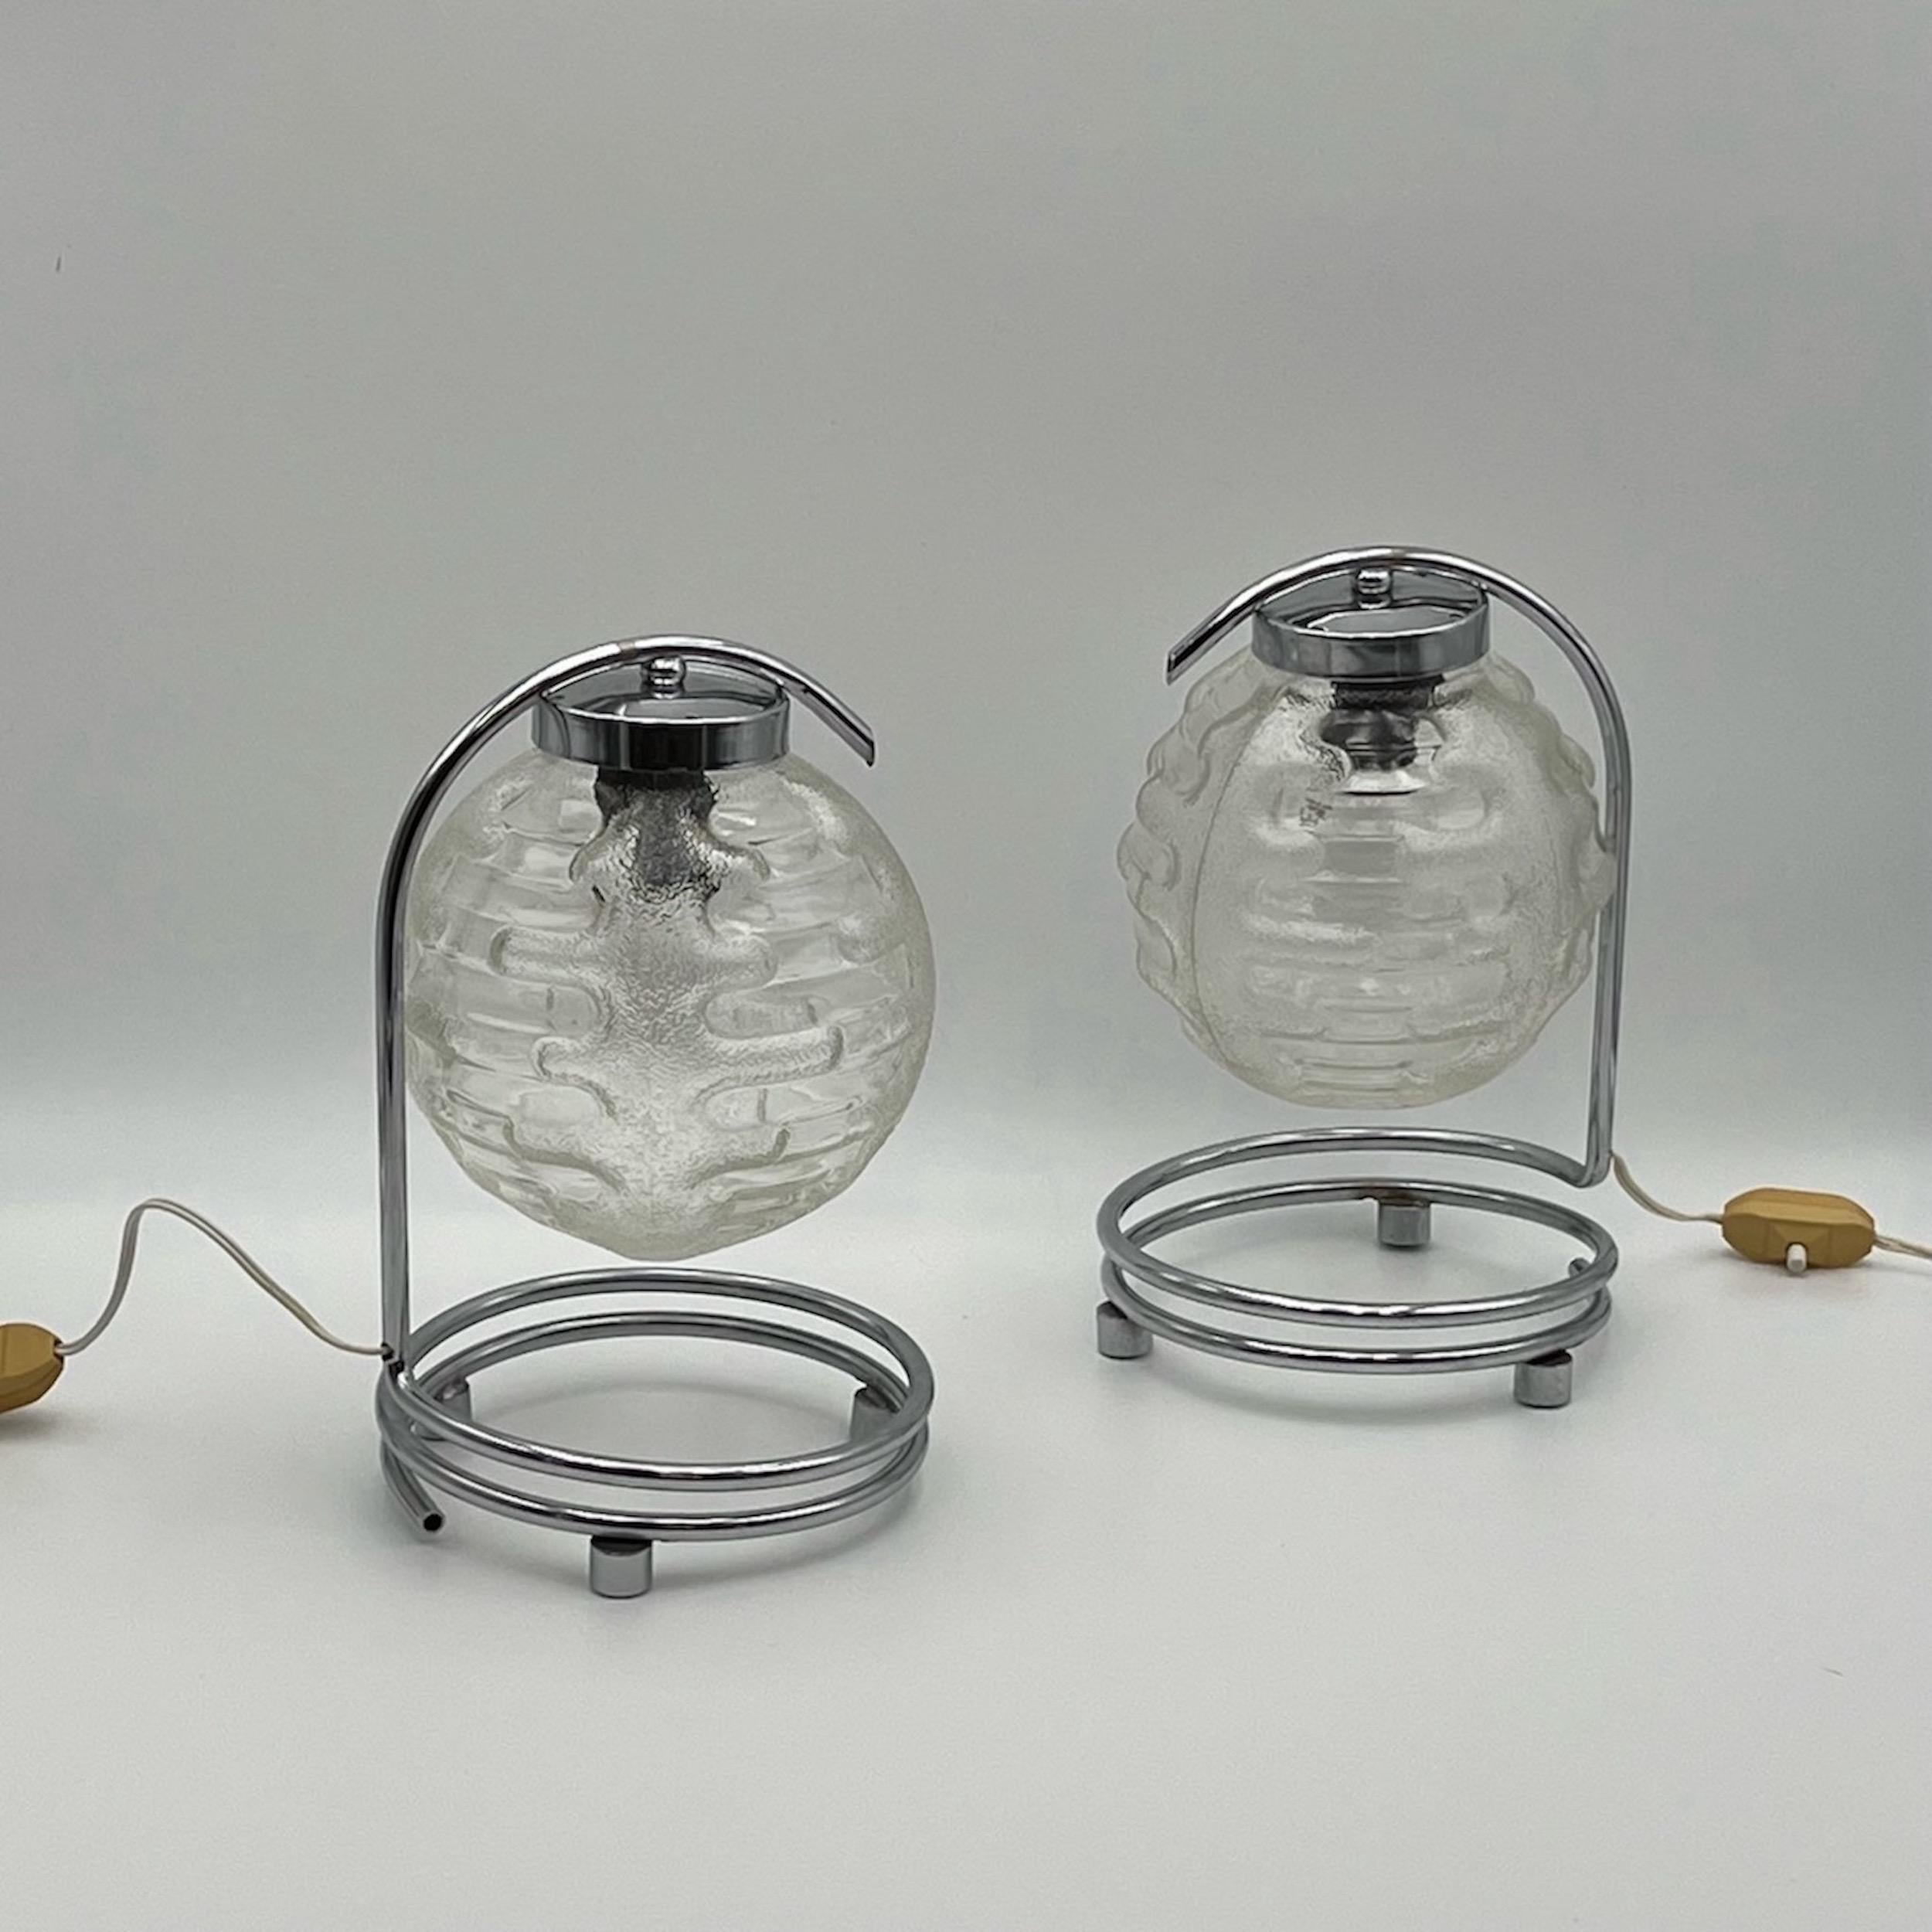 Chromed Lamps with Patterned Glass Globes by Richard Essig, 1970s, Set of 2 For Sale 2